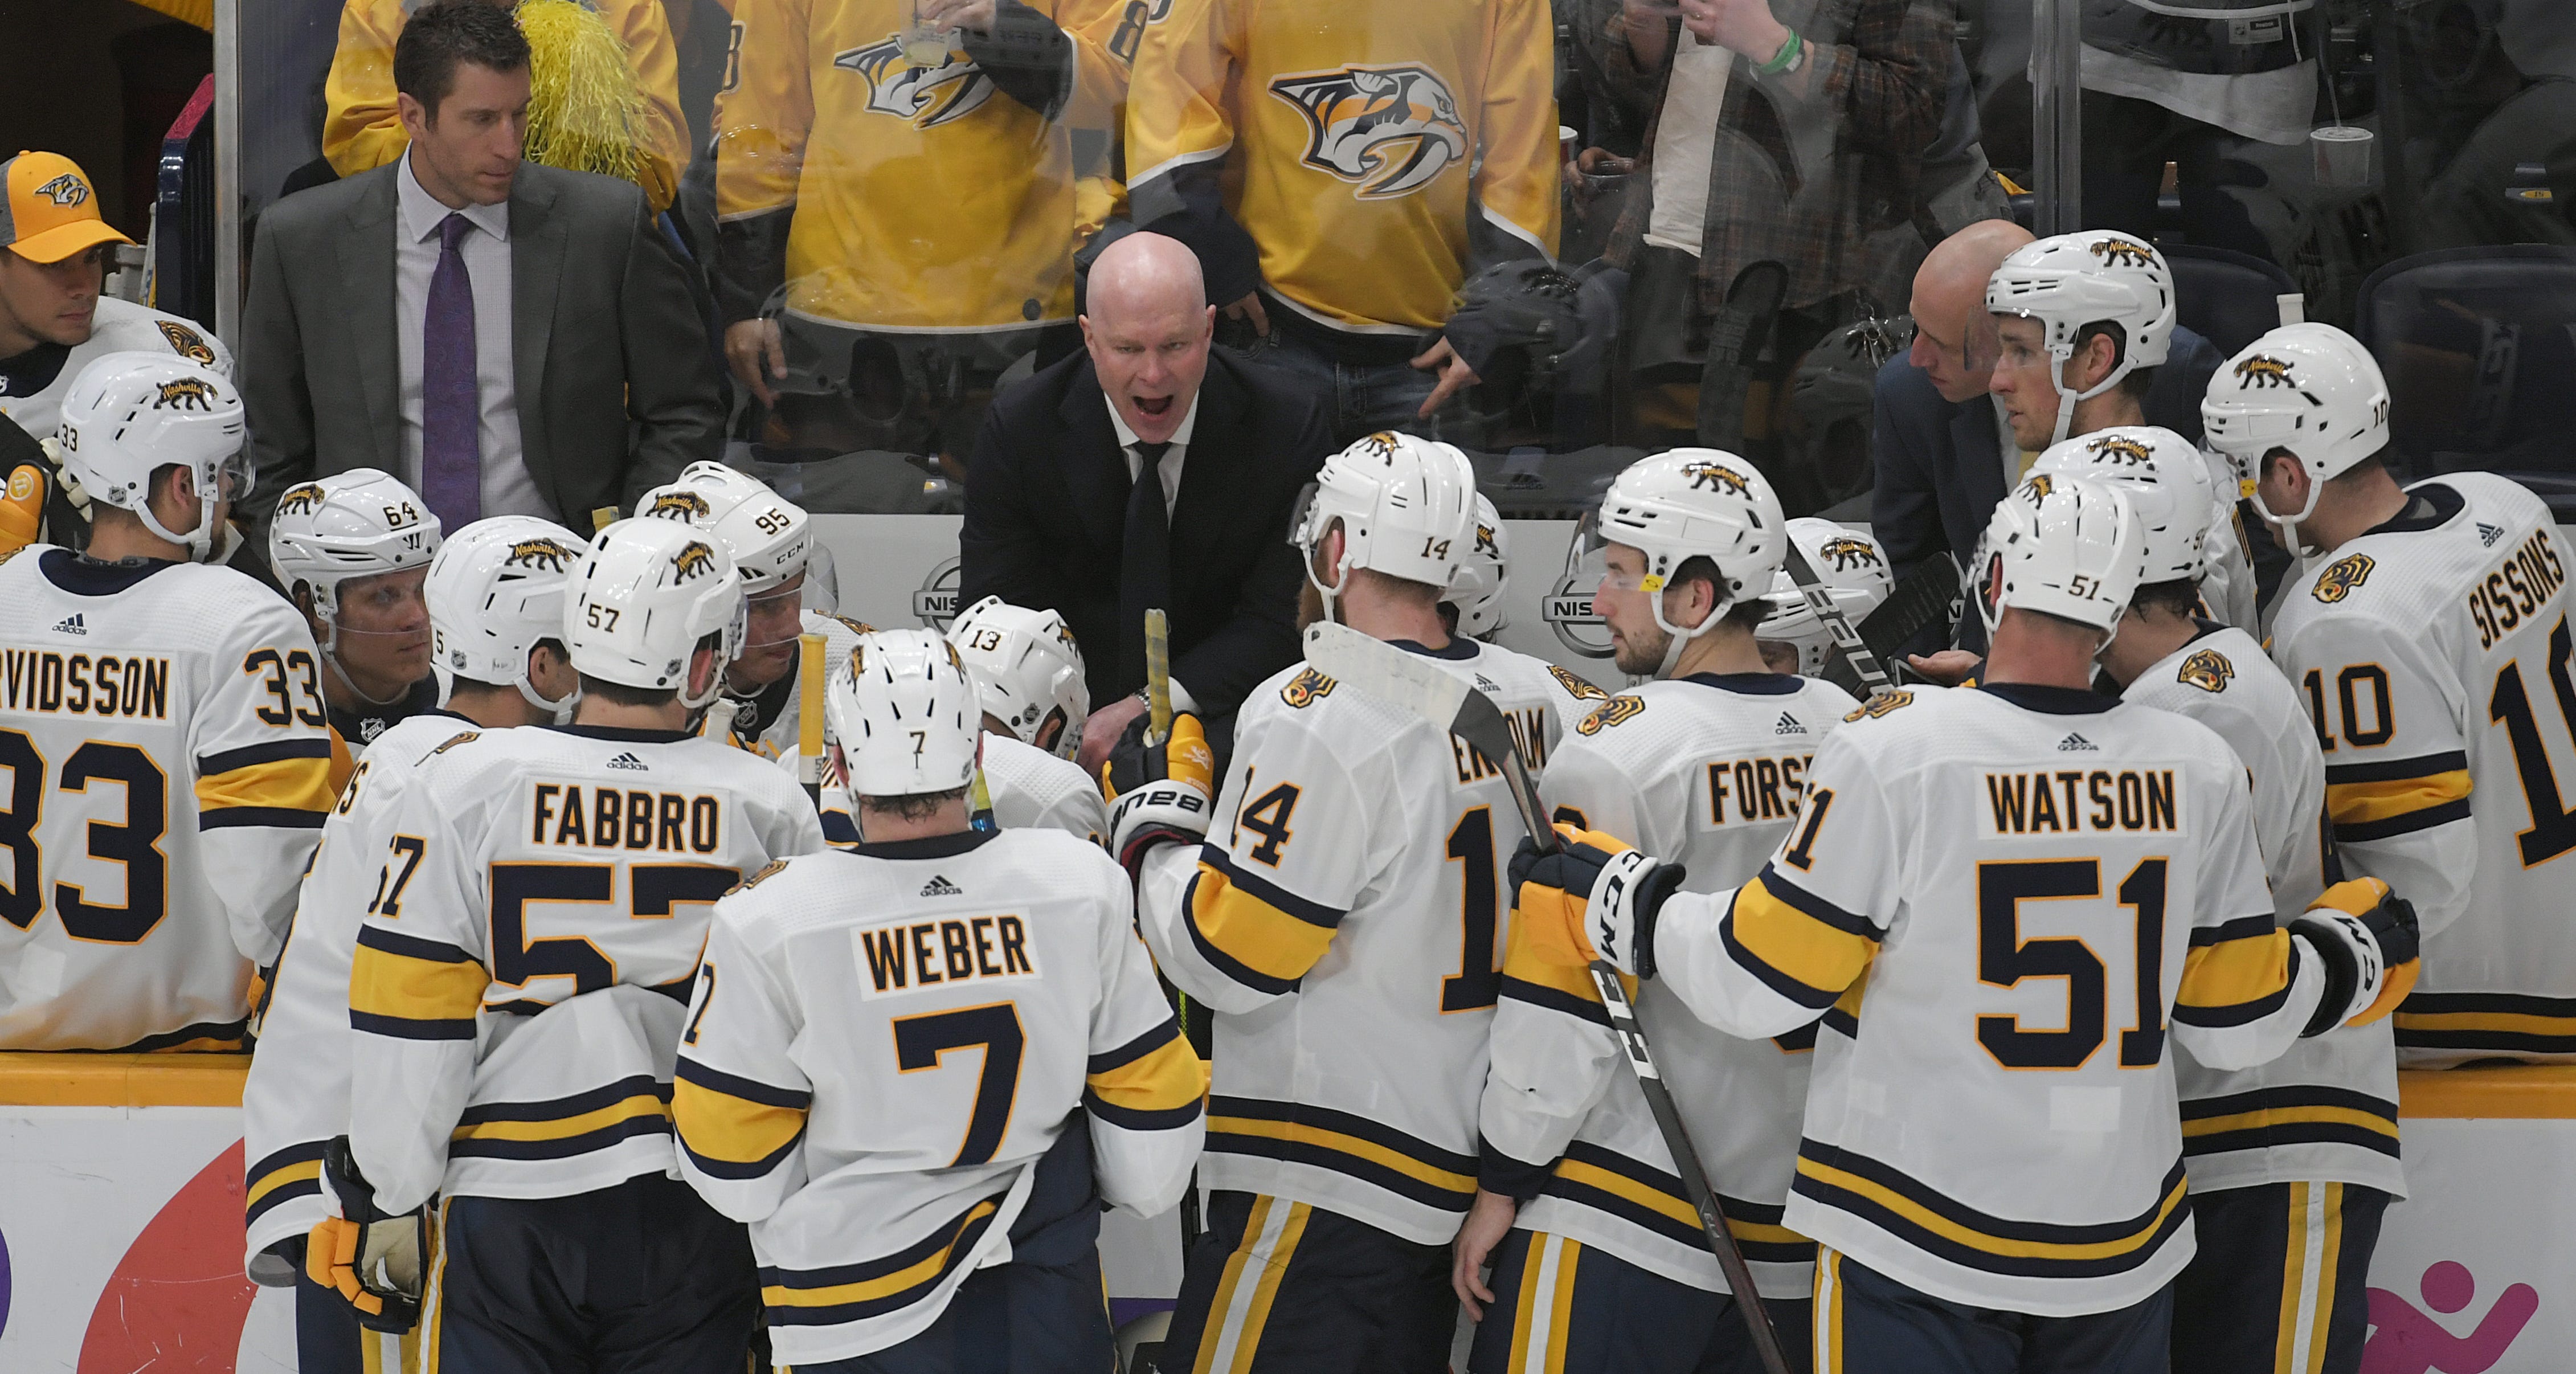 Predators coach John Hynes moves family, stays busy during NHL 'pause'